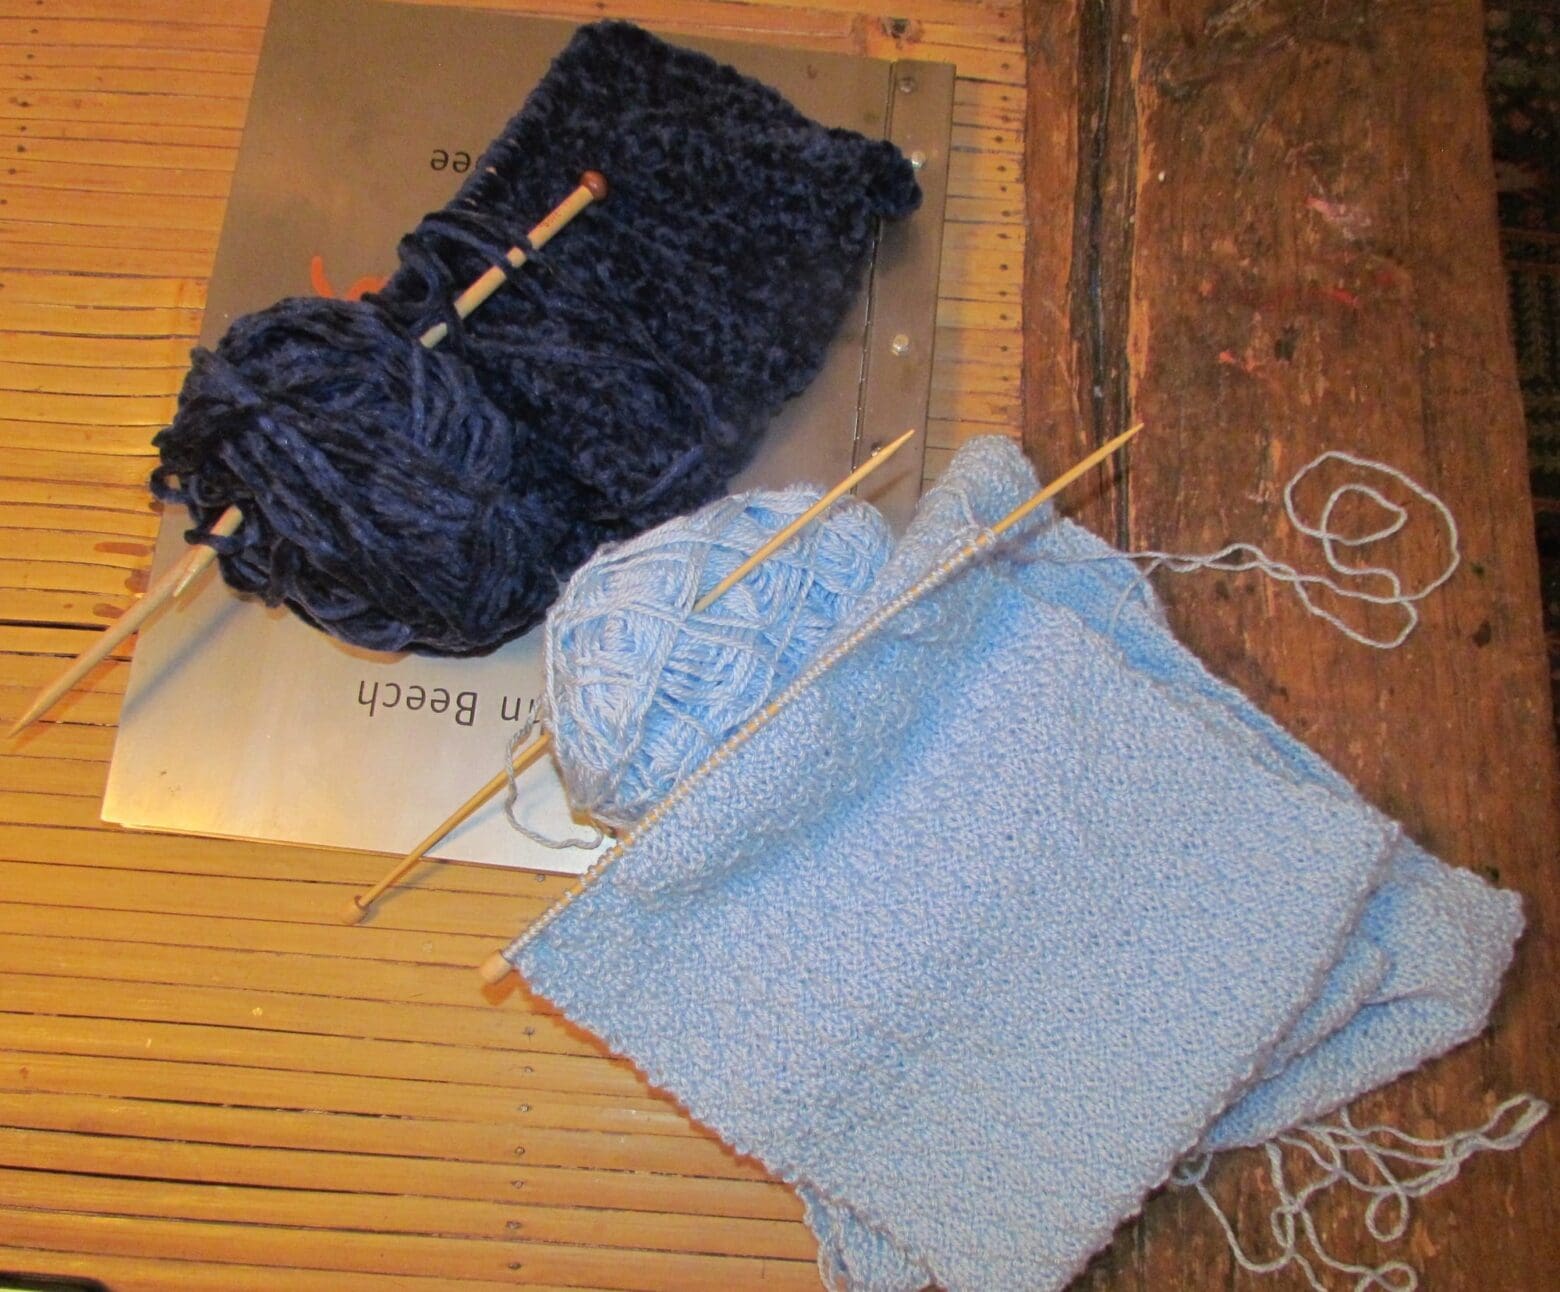 Light blue Scarf in alternating Knit 2, Purl 2 Pattern with Navy Blue Chenille infinity scarf in the background.